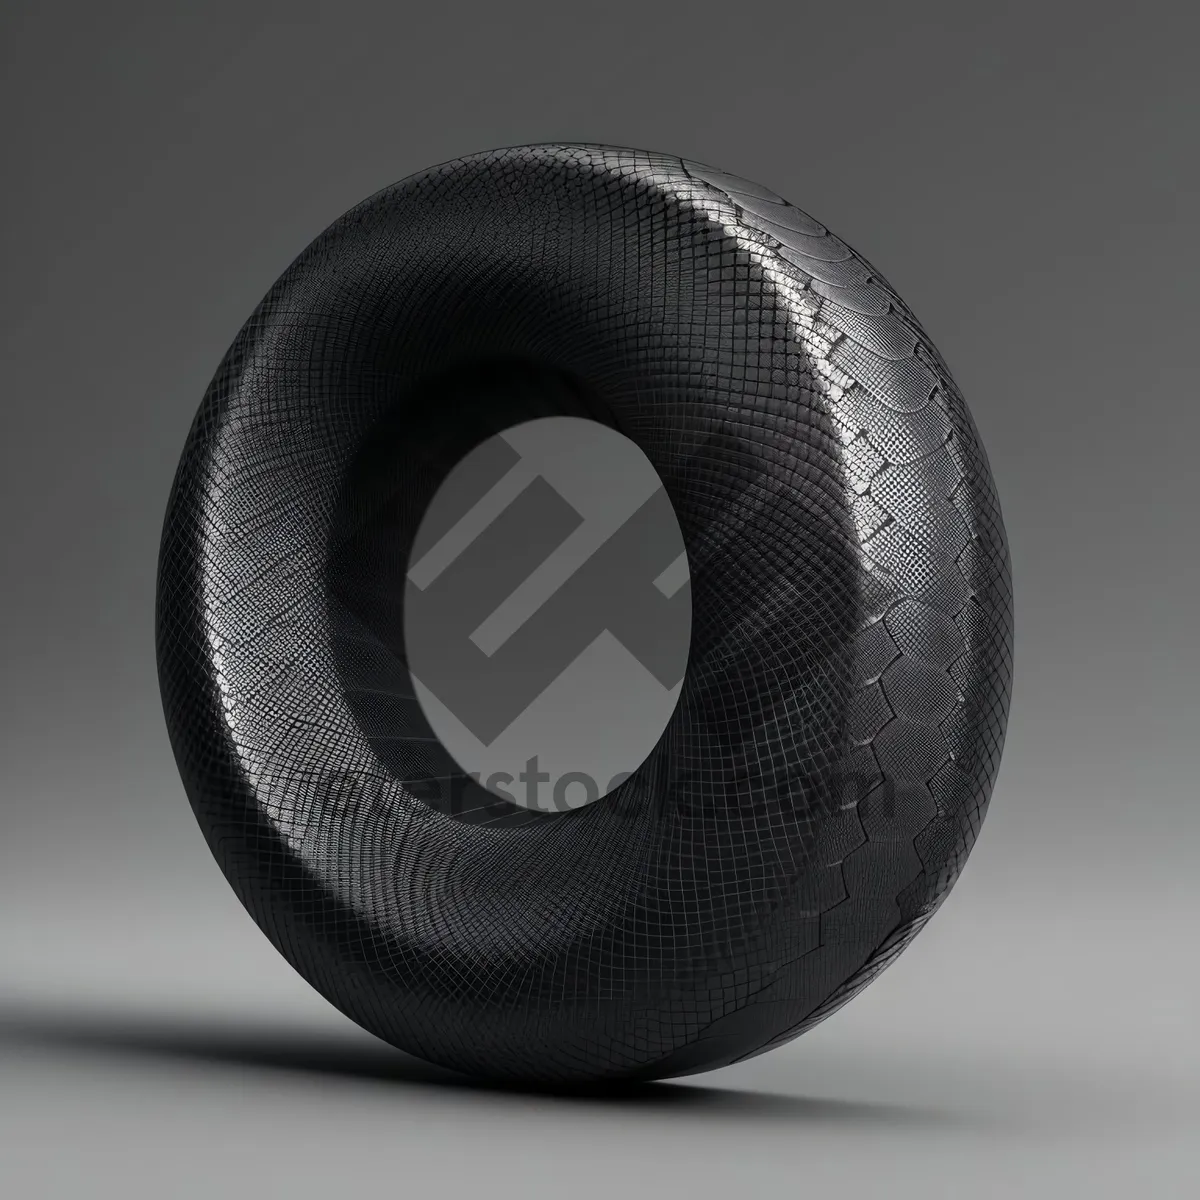 Picture of Powerful Bass Stereo Speaker for Immersive Audio Experience